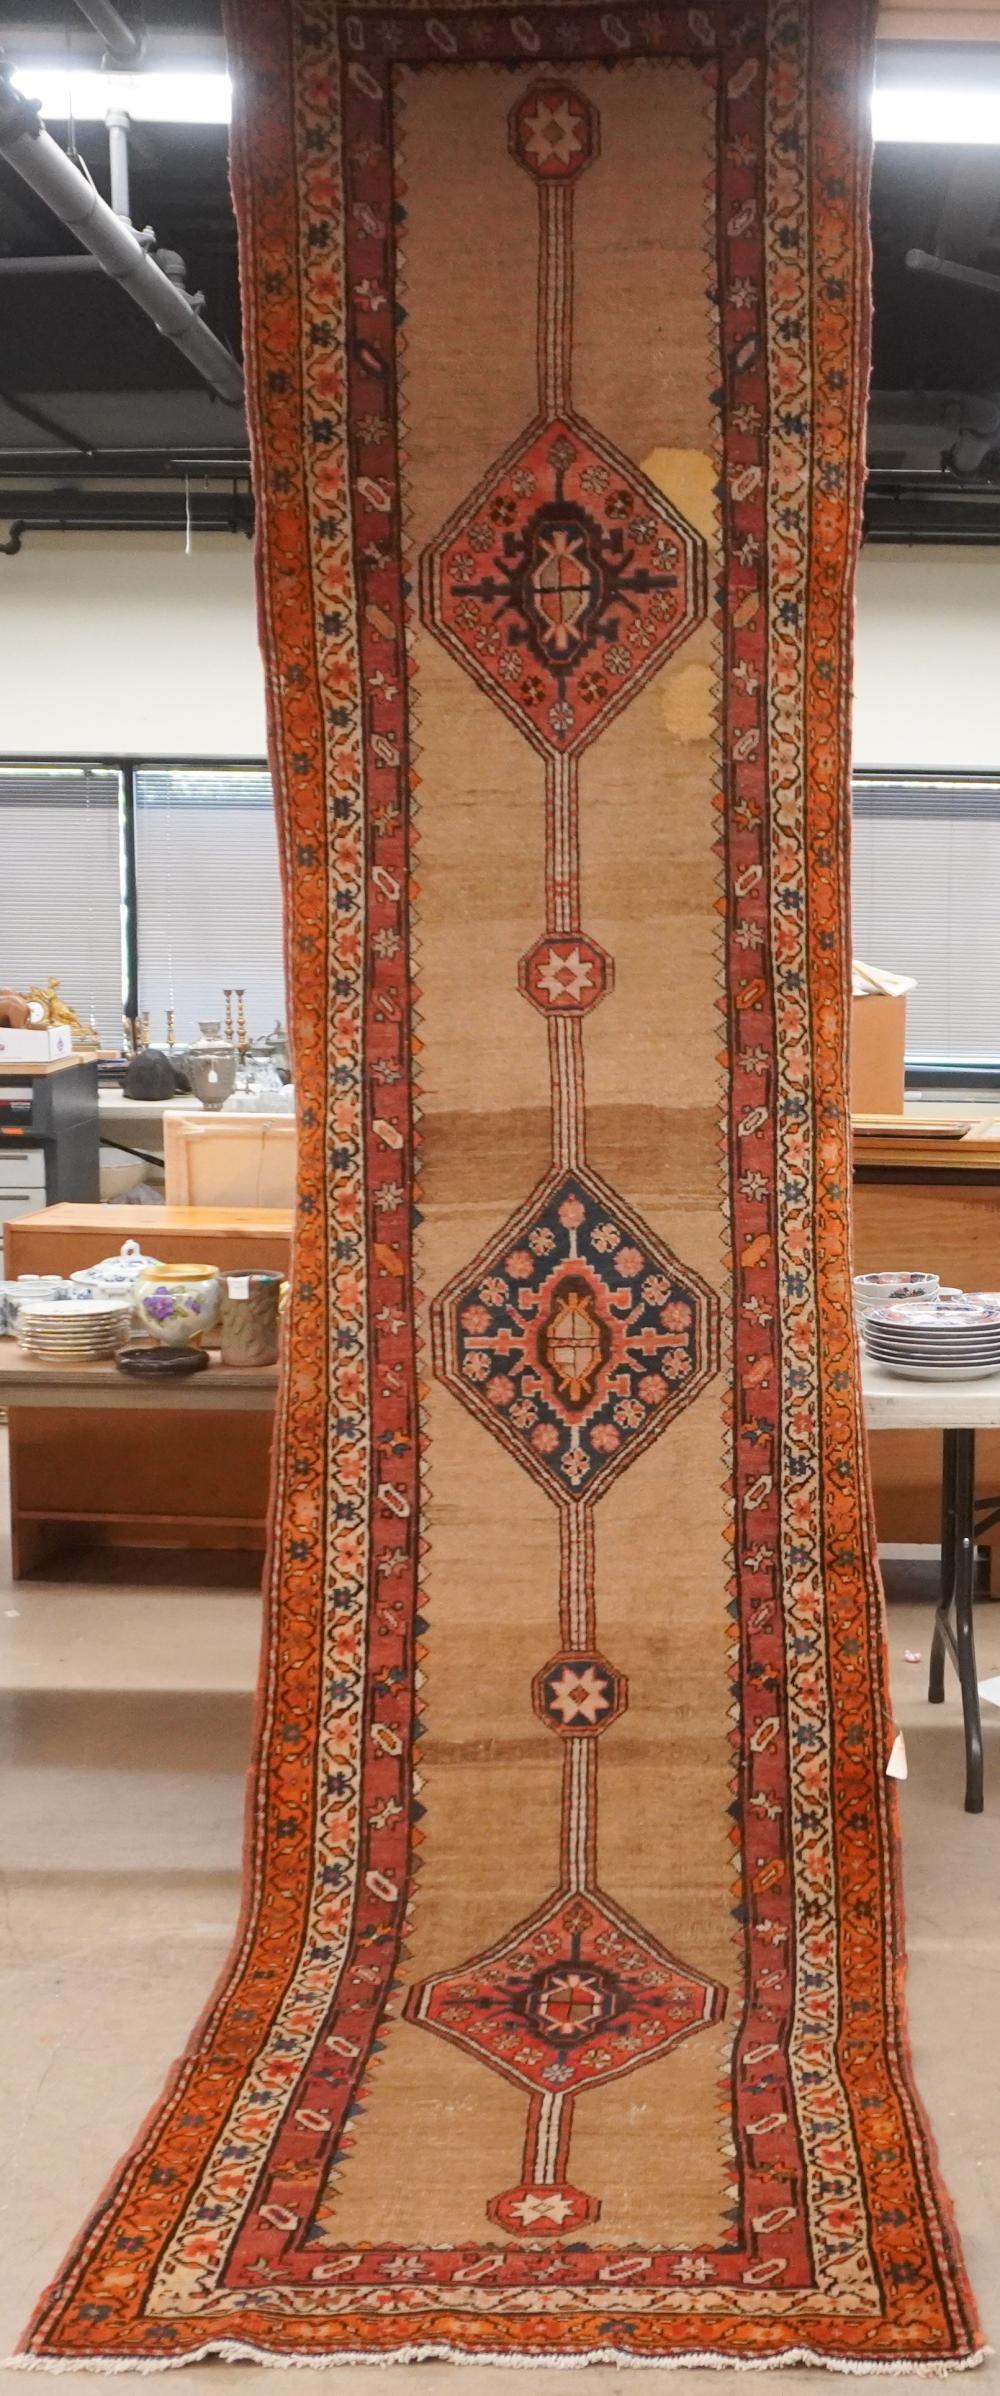 SARAB RUG, 13 FT 4 IN X 3 FT 1